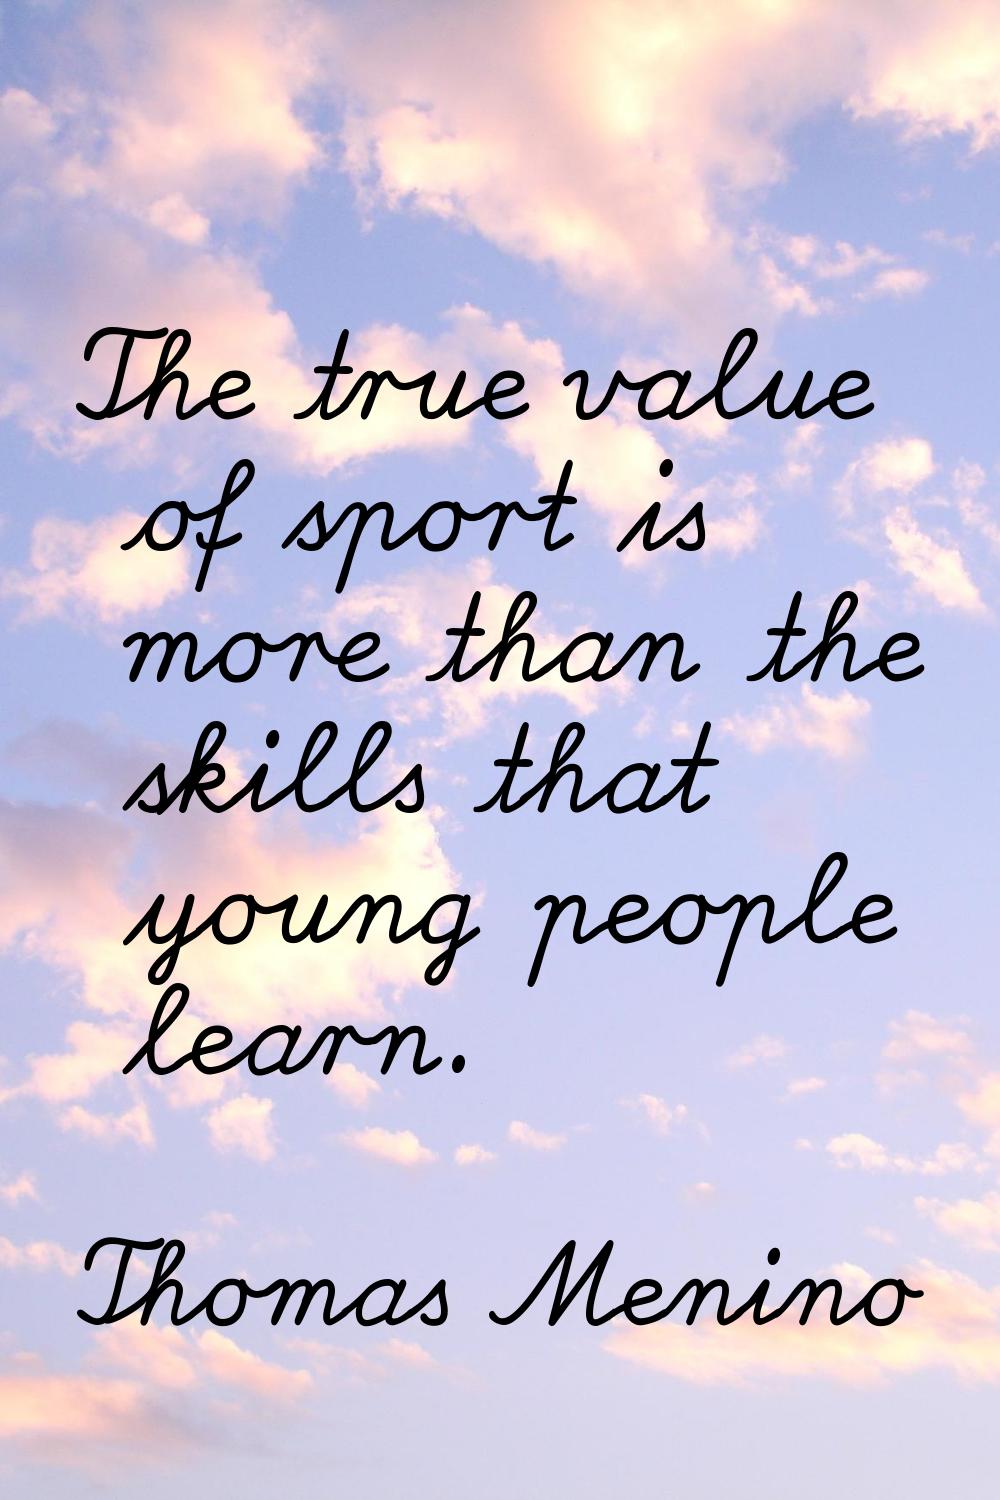 The true value of sport is more than the skills that young people learn.